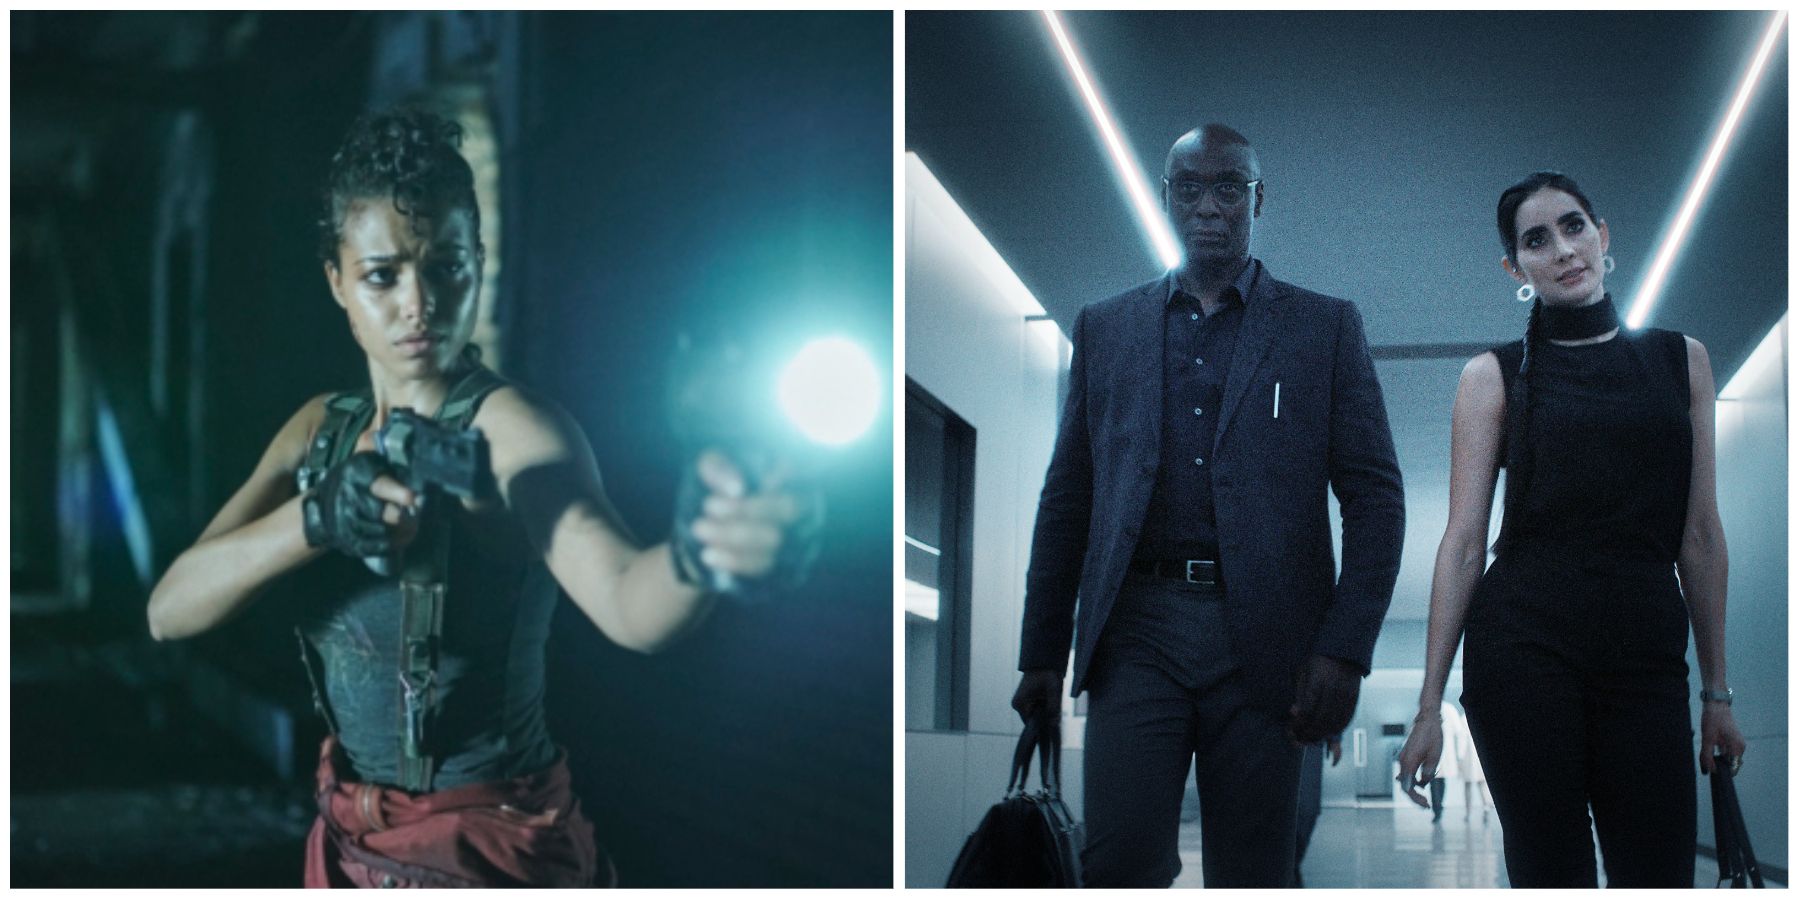 Characters from the Resident Evil show on Netflix